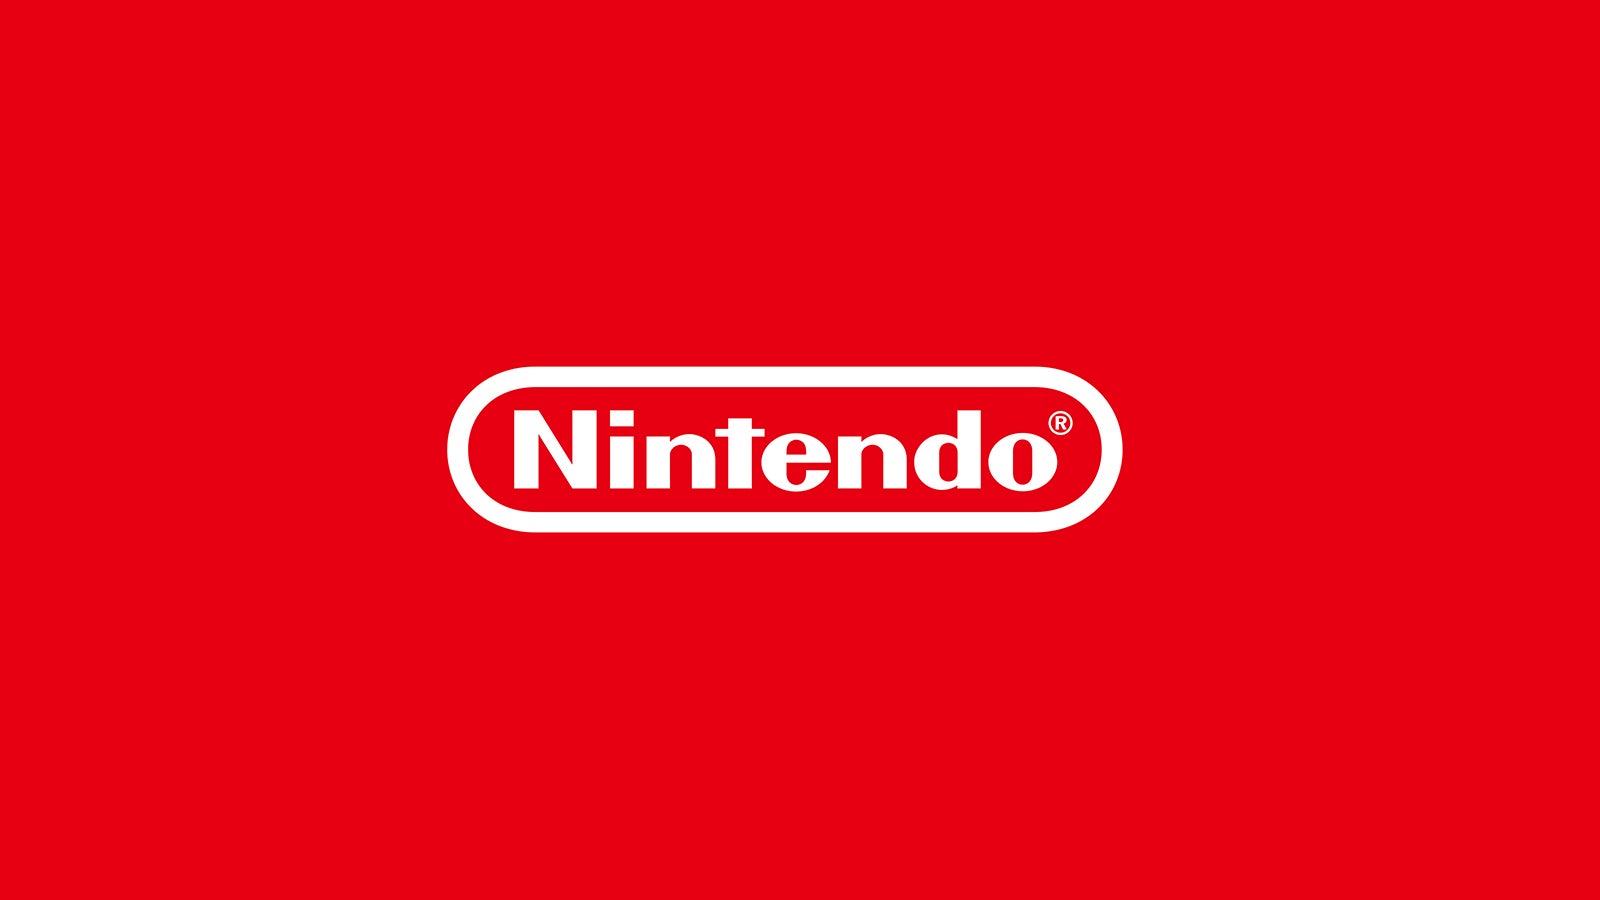 Nintendo Direct scheduled for tomorrow